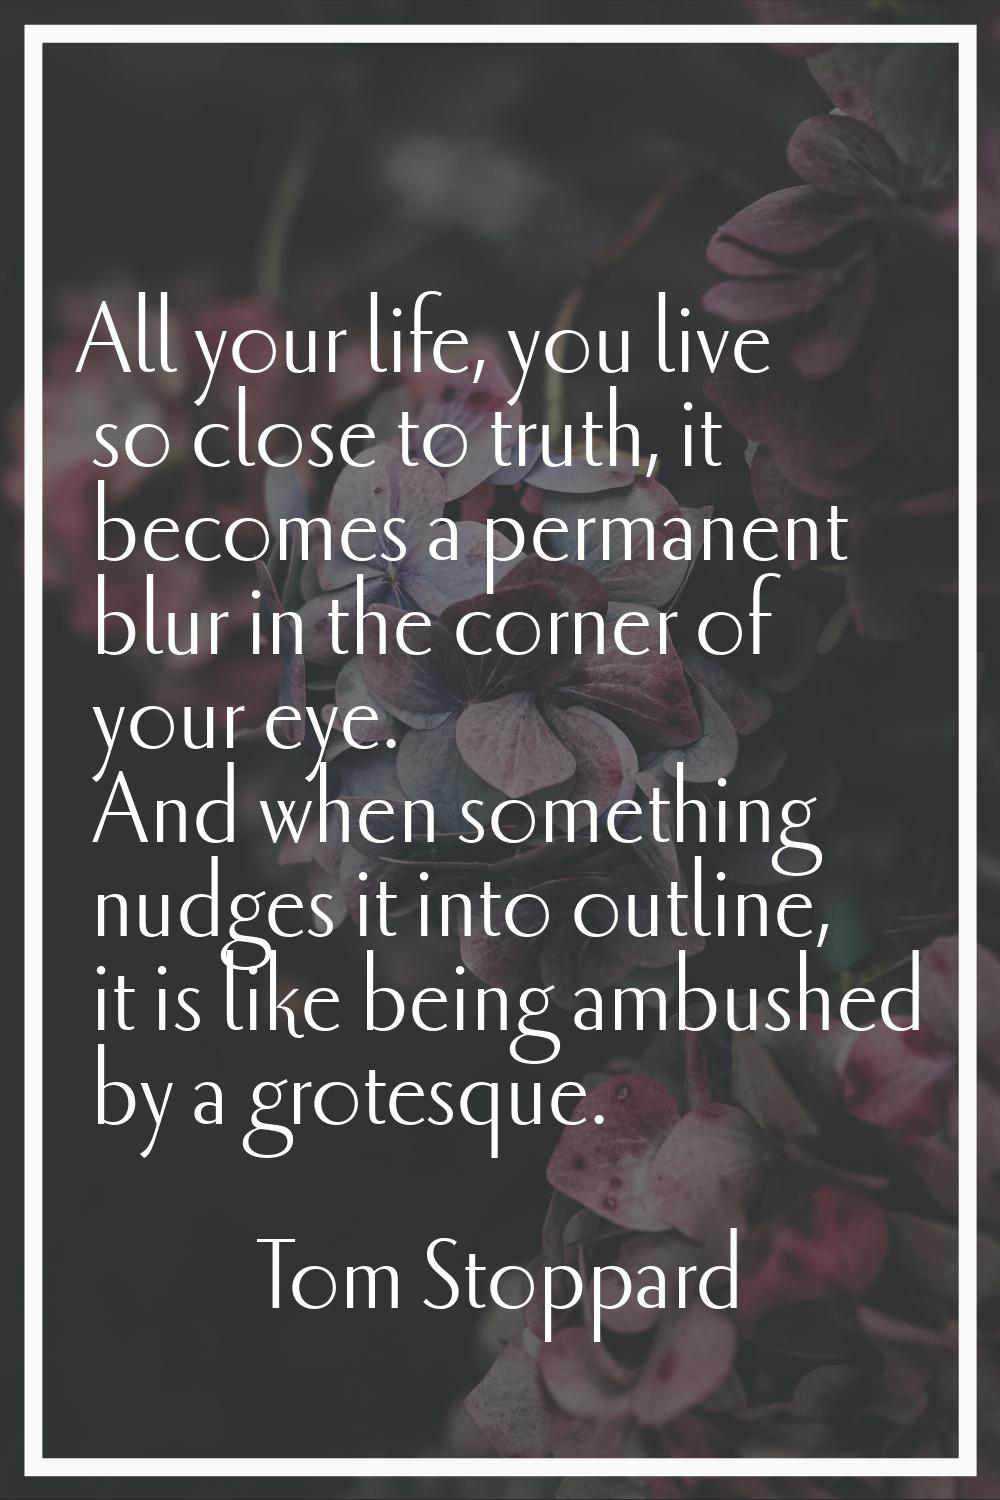 All your life, you live so close to truth, it becomes a permanent blur in the corner of your eye. A